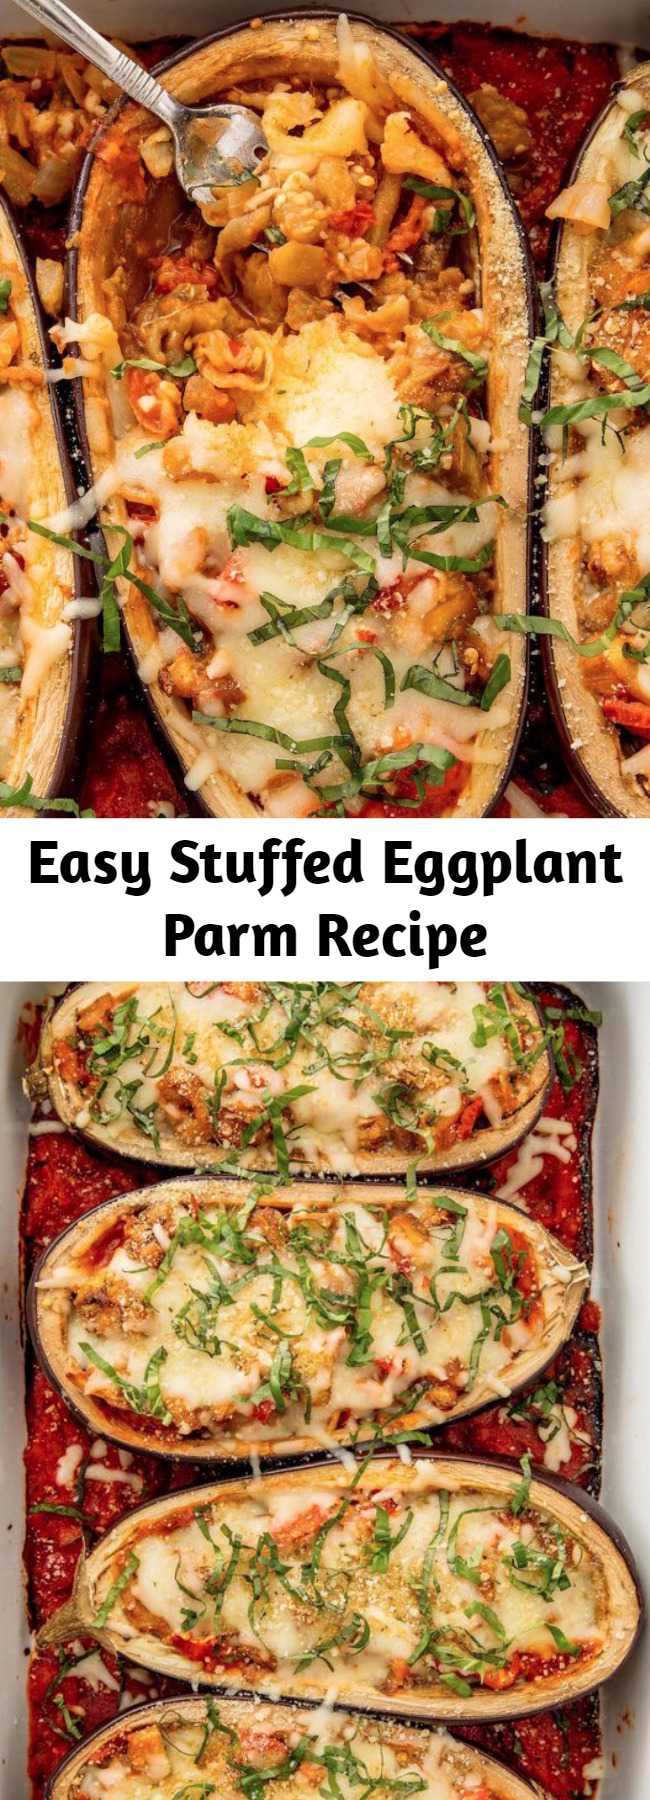 Easy Stuffed Eggplant Parm Recipe - Stuffed Eggplant Parm is the low-carb dinner that will make you actually want to eat vegetables. You won't miss the pasta.